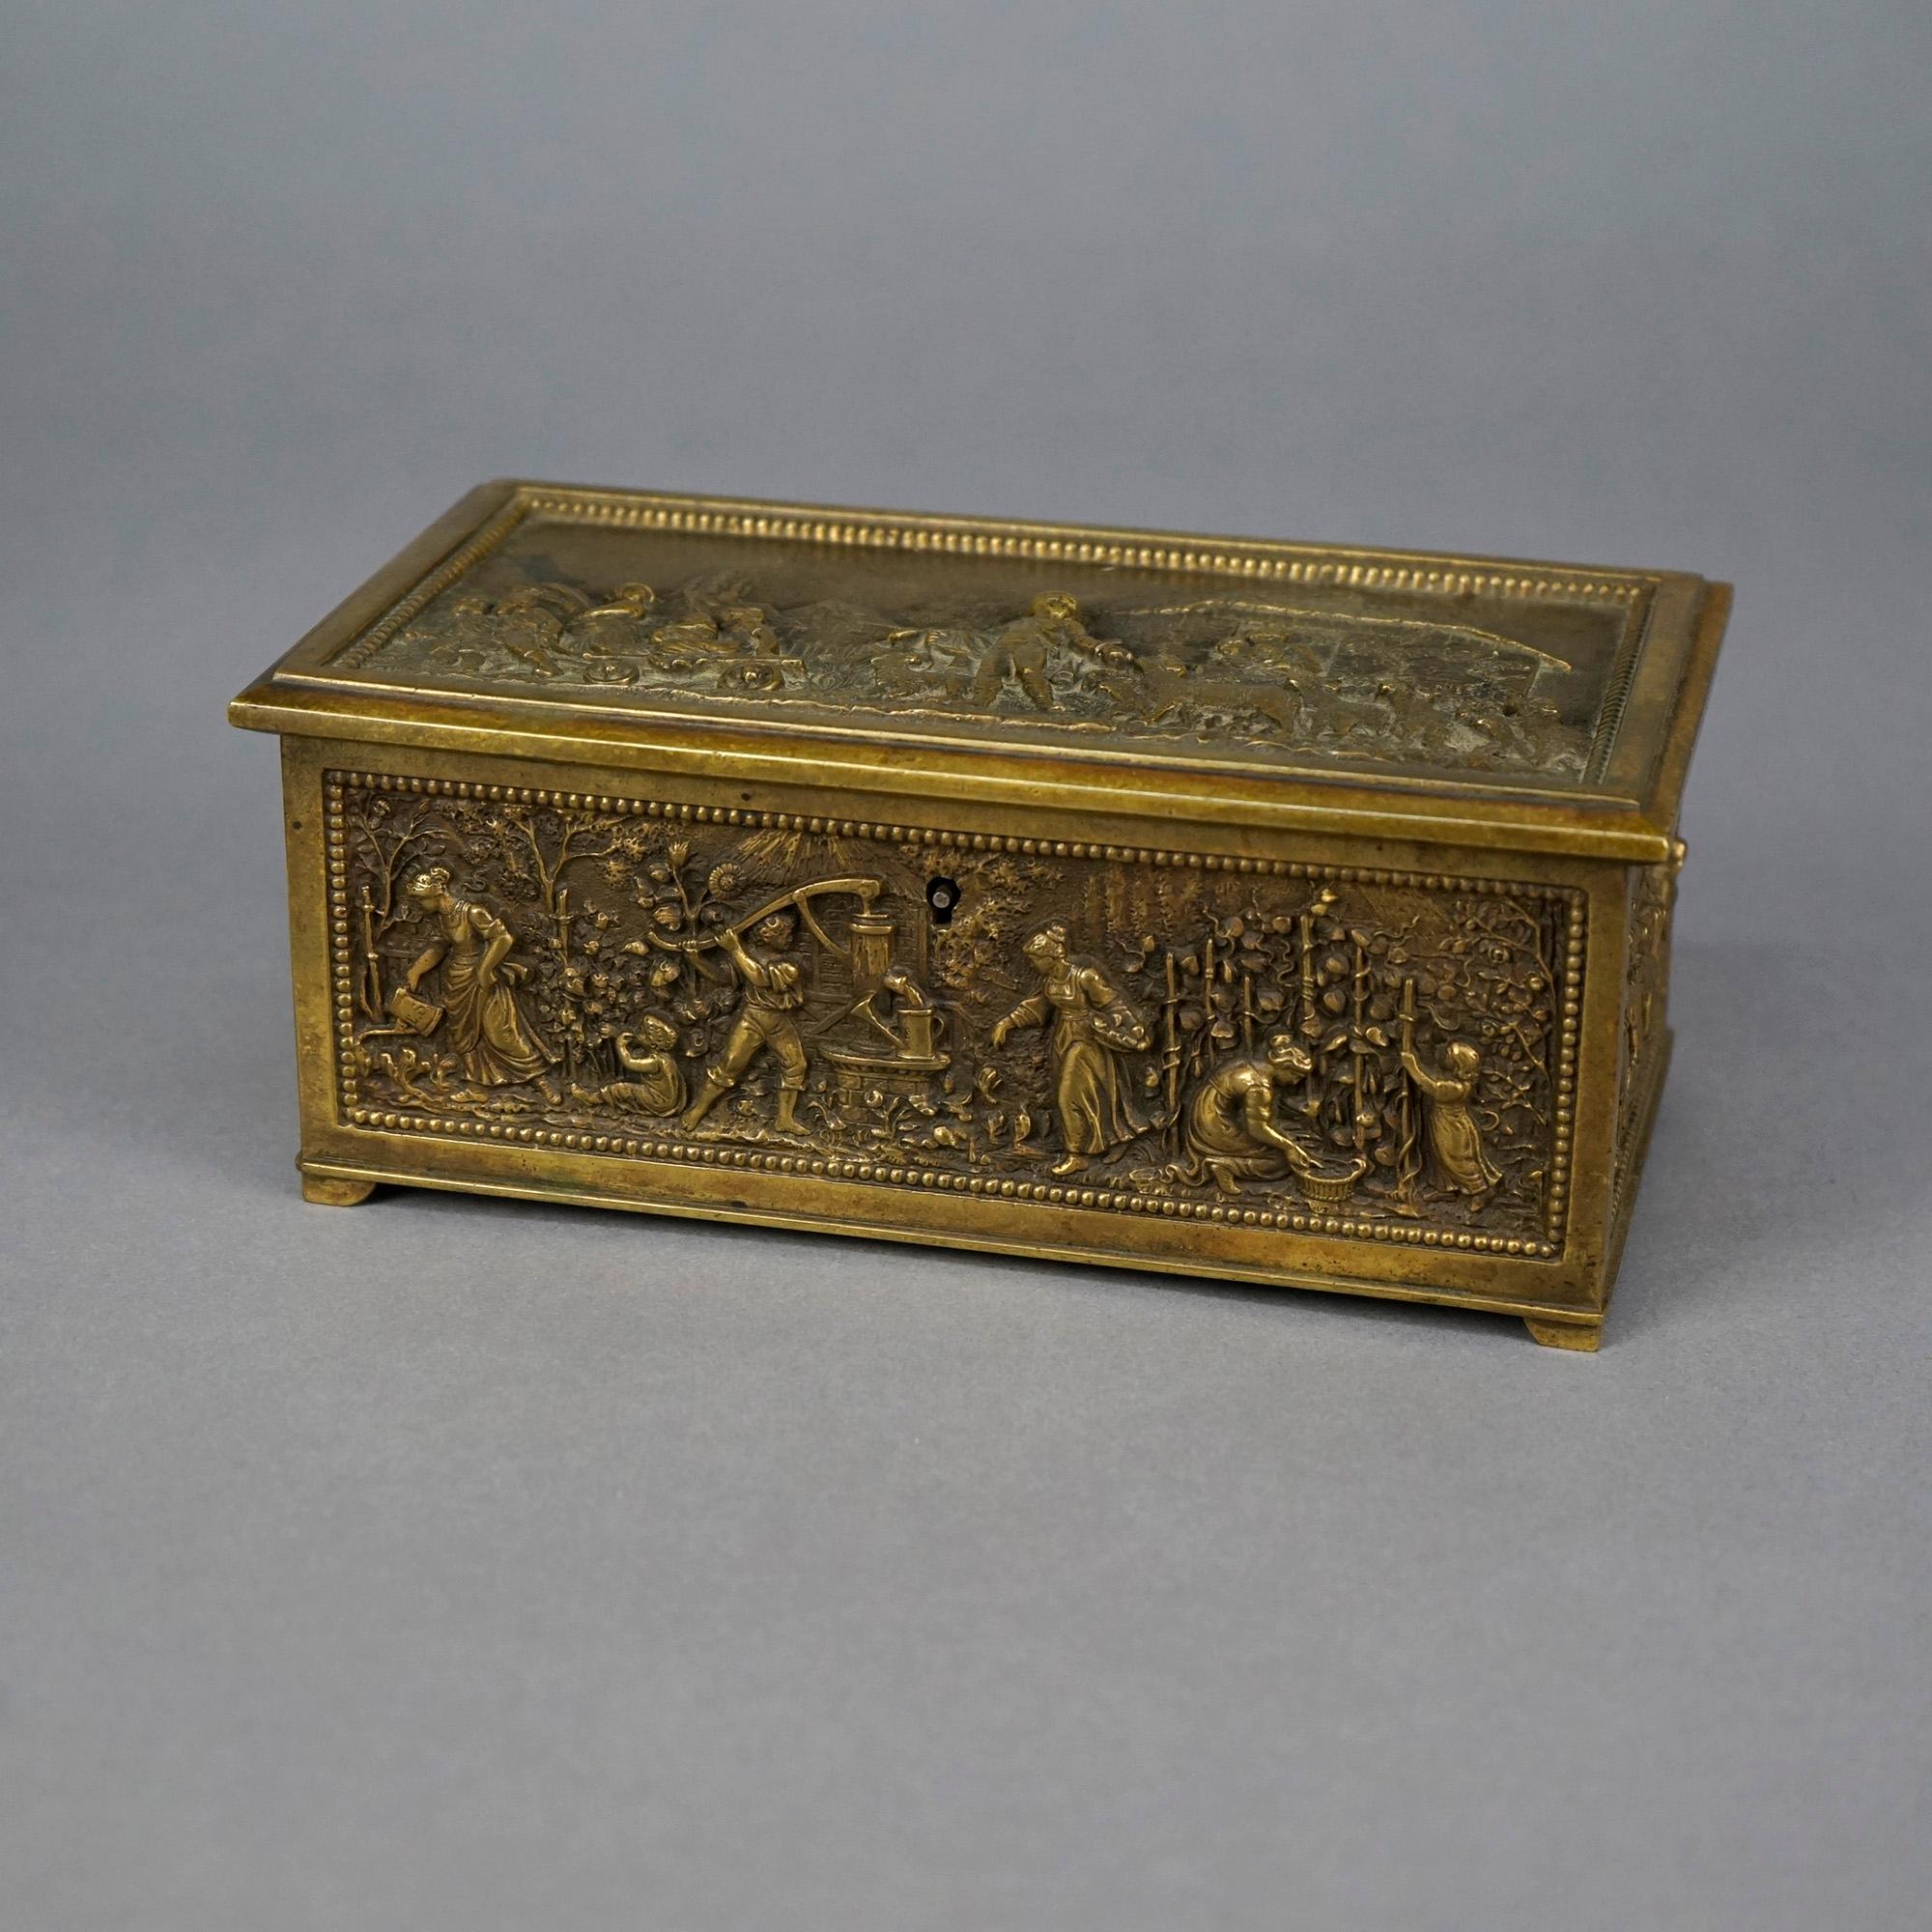 An antique dresser box offers cast bronze construction with high relief Continental village genre scene having figures, farm animals, and structures in outdoor countryside setting, 19th century

Measures- 3.25''H x 8''W x 4''D.